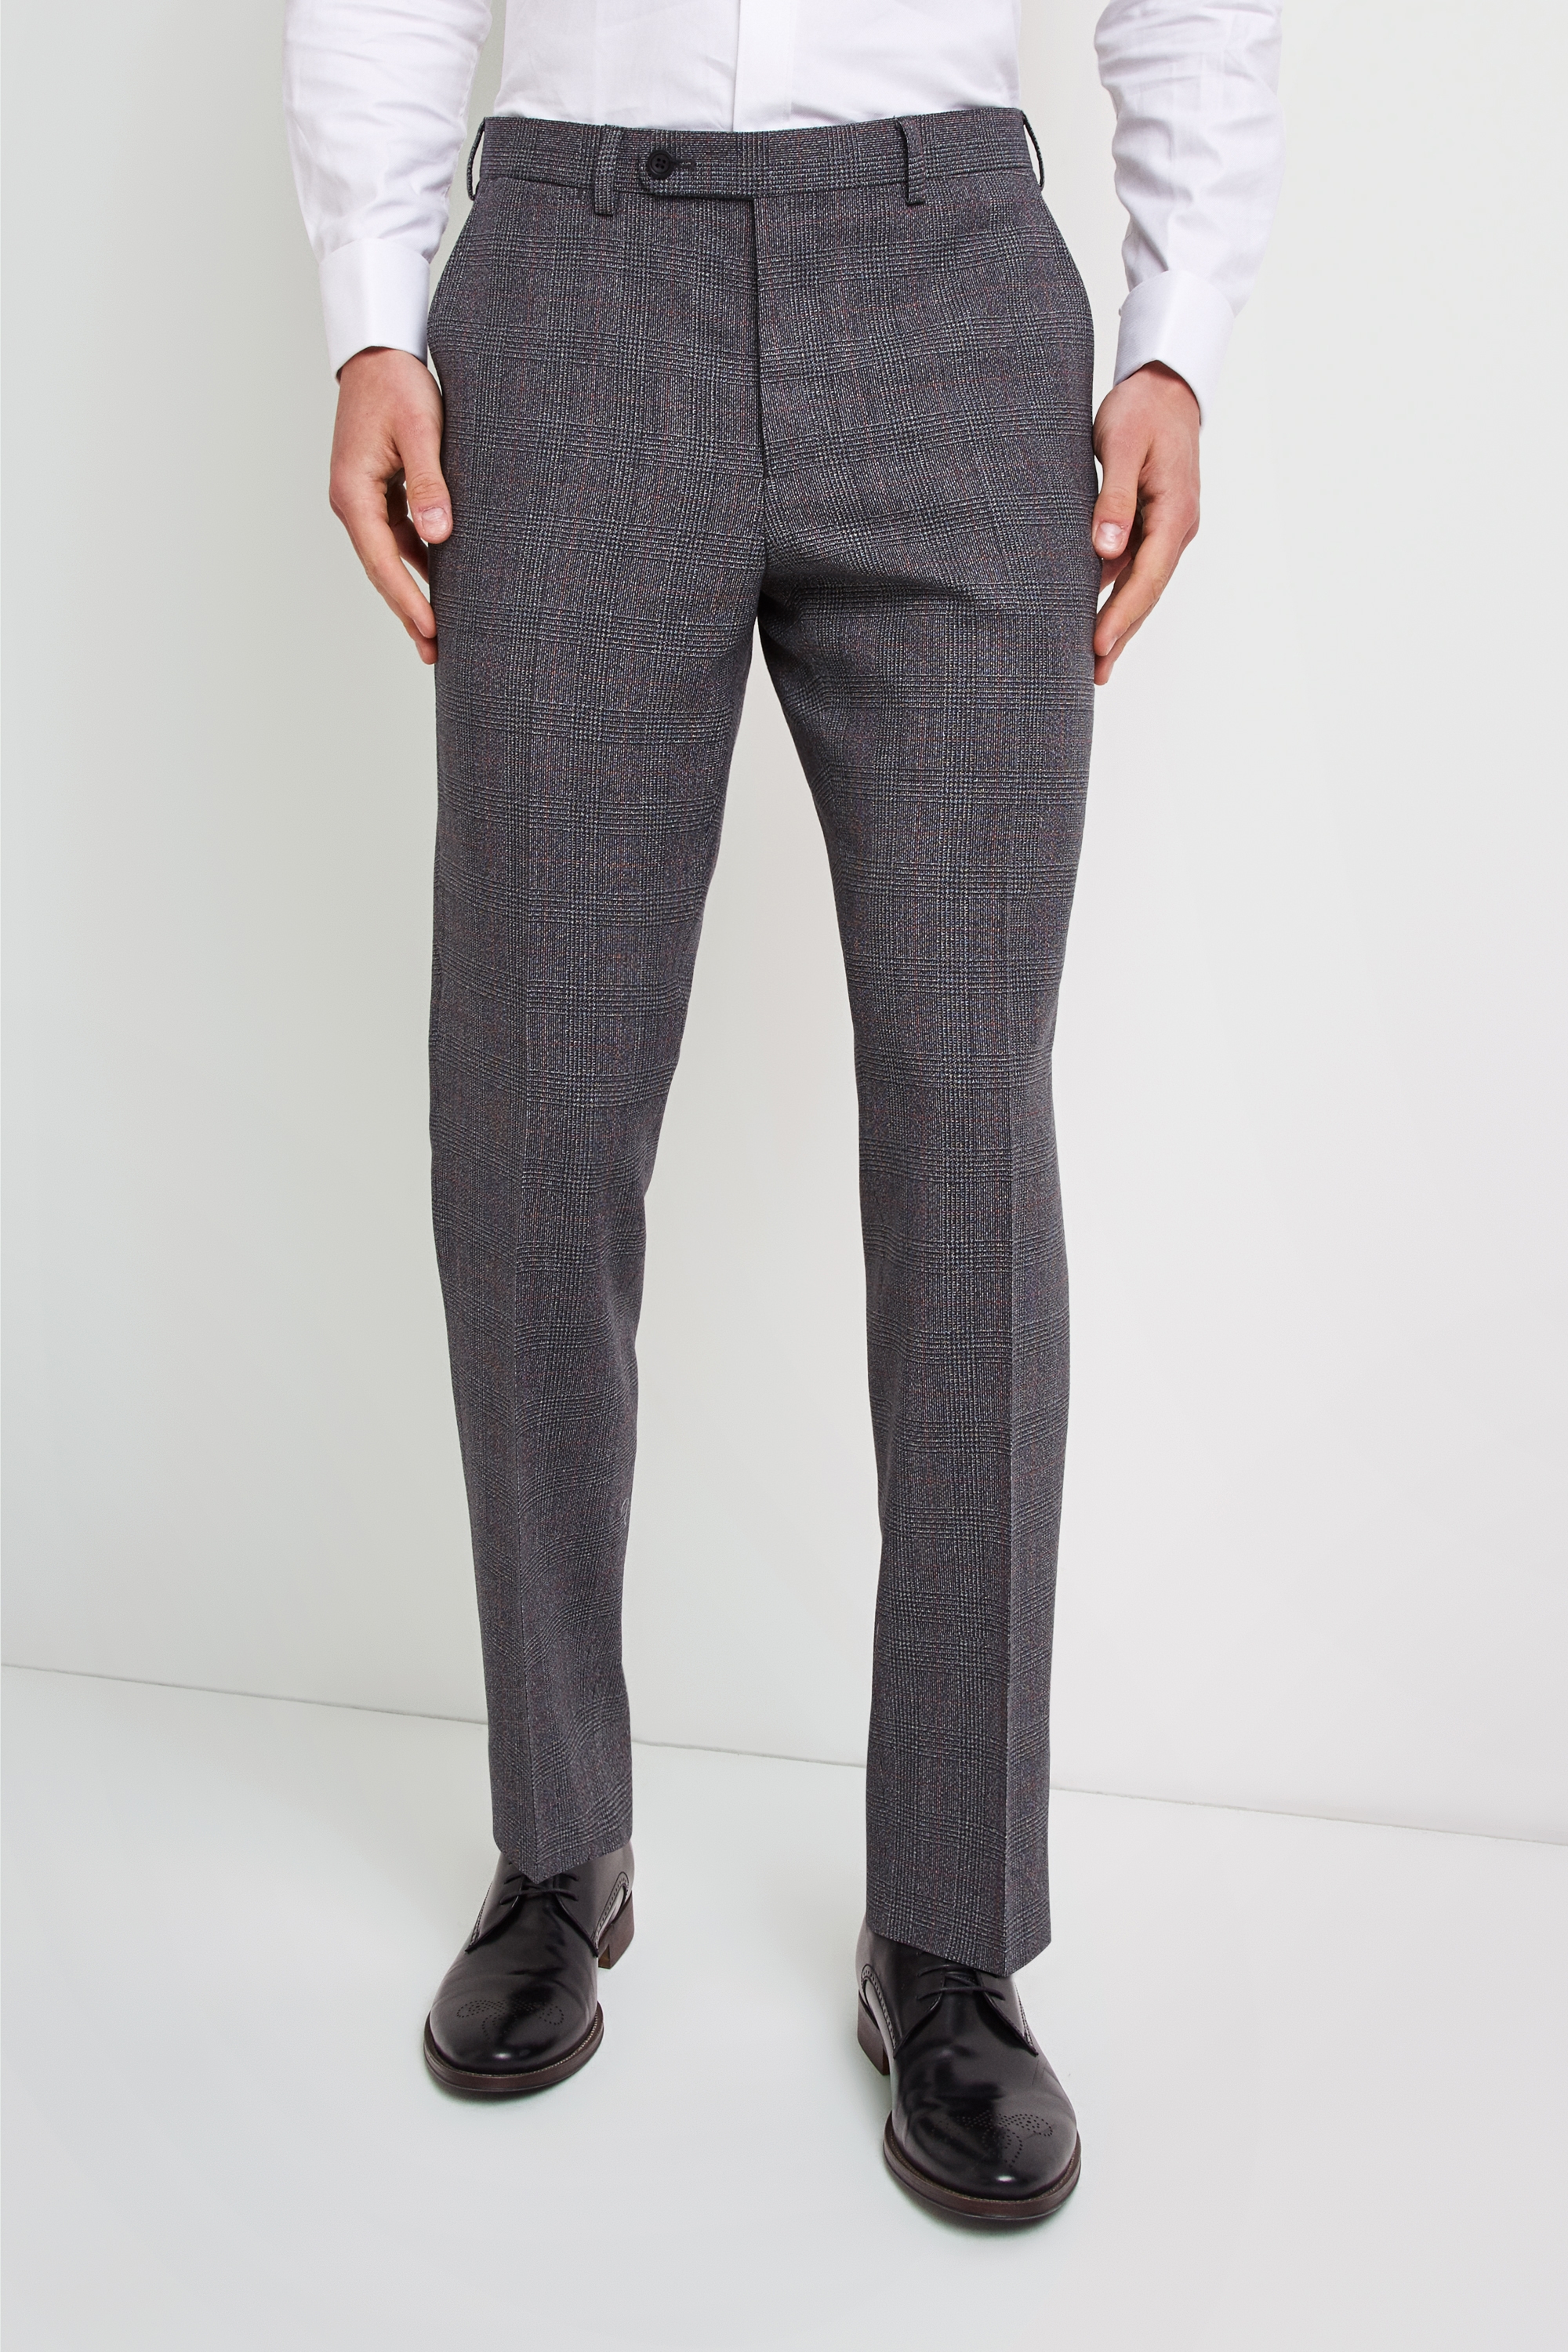 Ermenegildo Zegna Cloth Tailored Fit Grey with Red Check Trousers